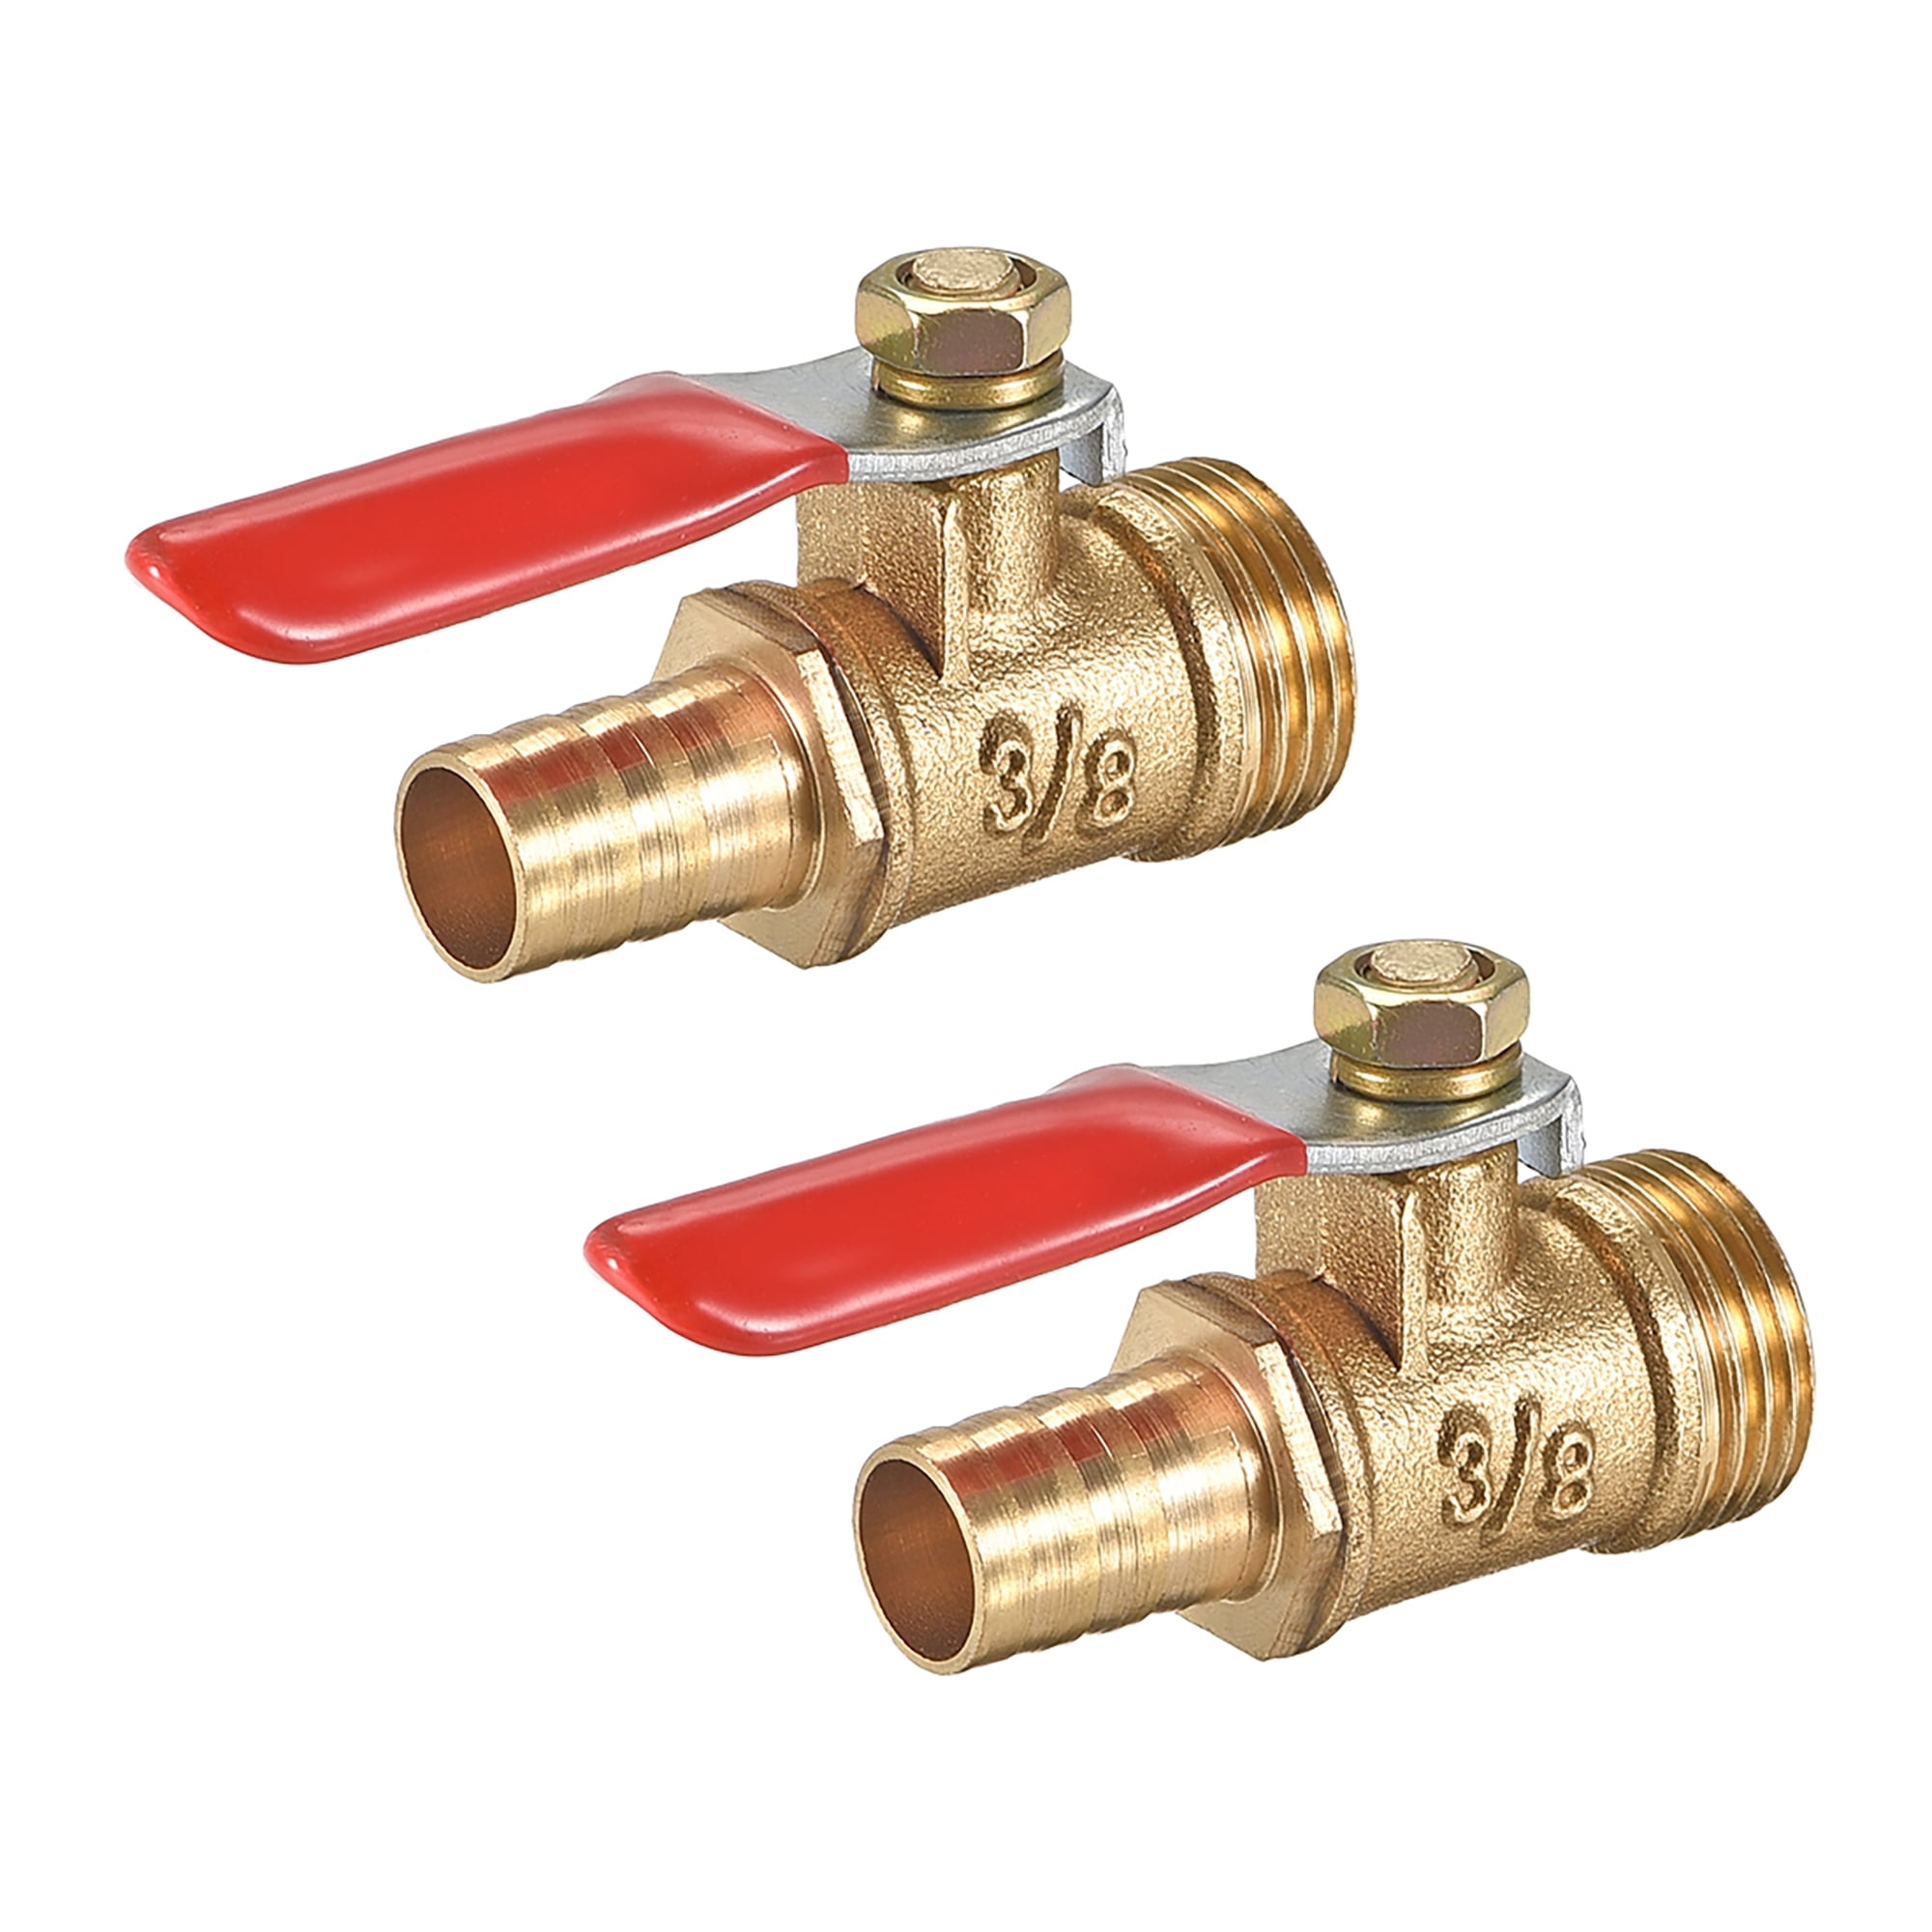 Metaland Brass 3 Way Shut-Off Valve 1/2 Hose Barb 2 Switch Y Shaped Ball Valve Water/Fuel/Air